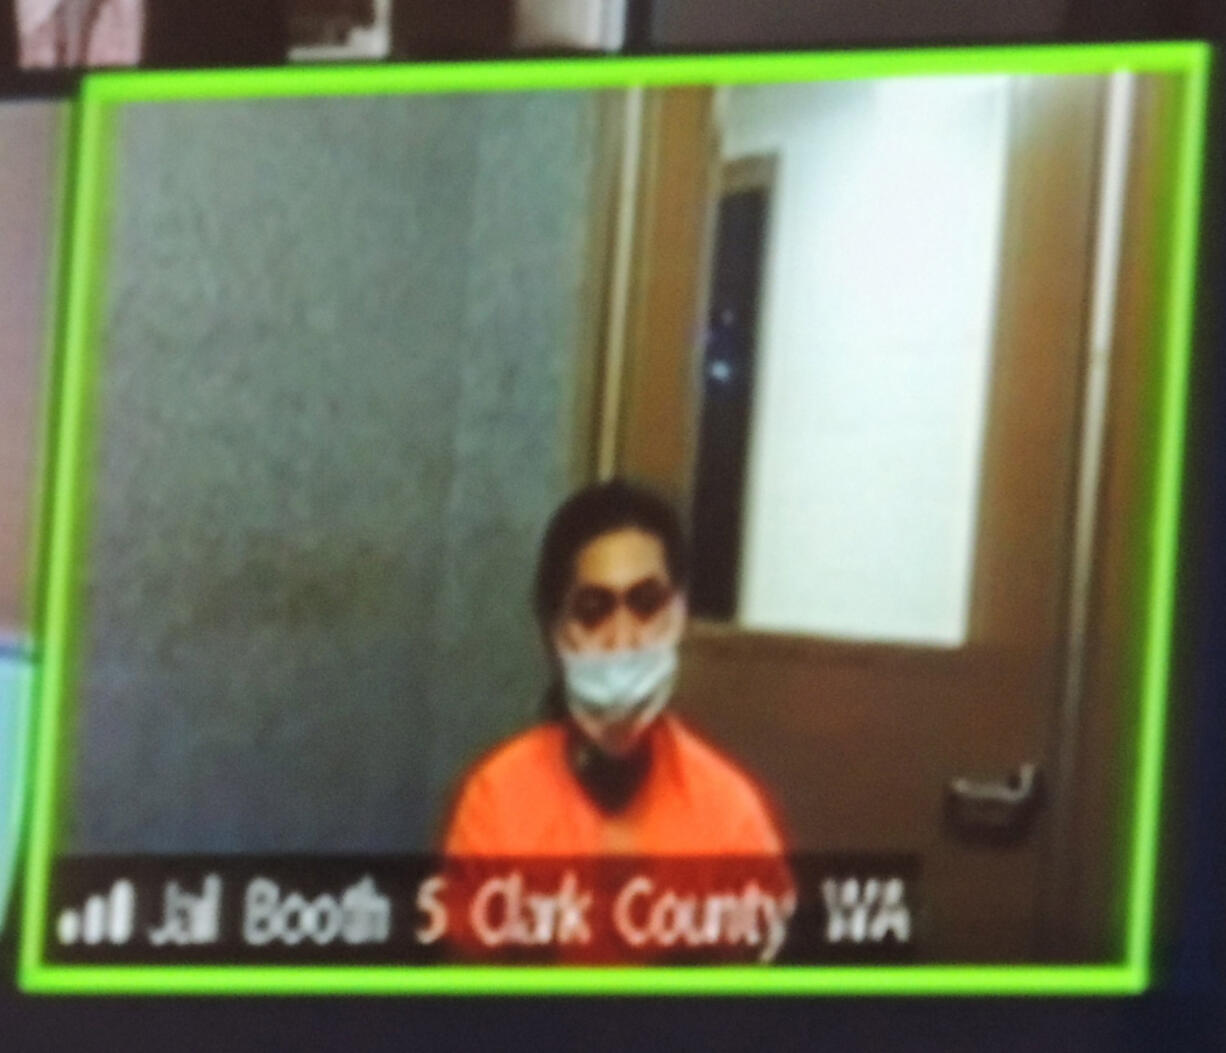 Alexandro Bolon Manrero, 19, appears Friday in Clark County Superior Court on suspicion of second-degree murder. Bolon Manrero was arrested Thursday in connection with the Nov. 19 shooting death of Josue Lopez Padilla.